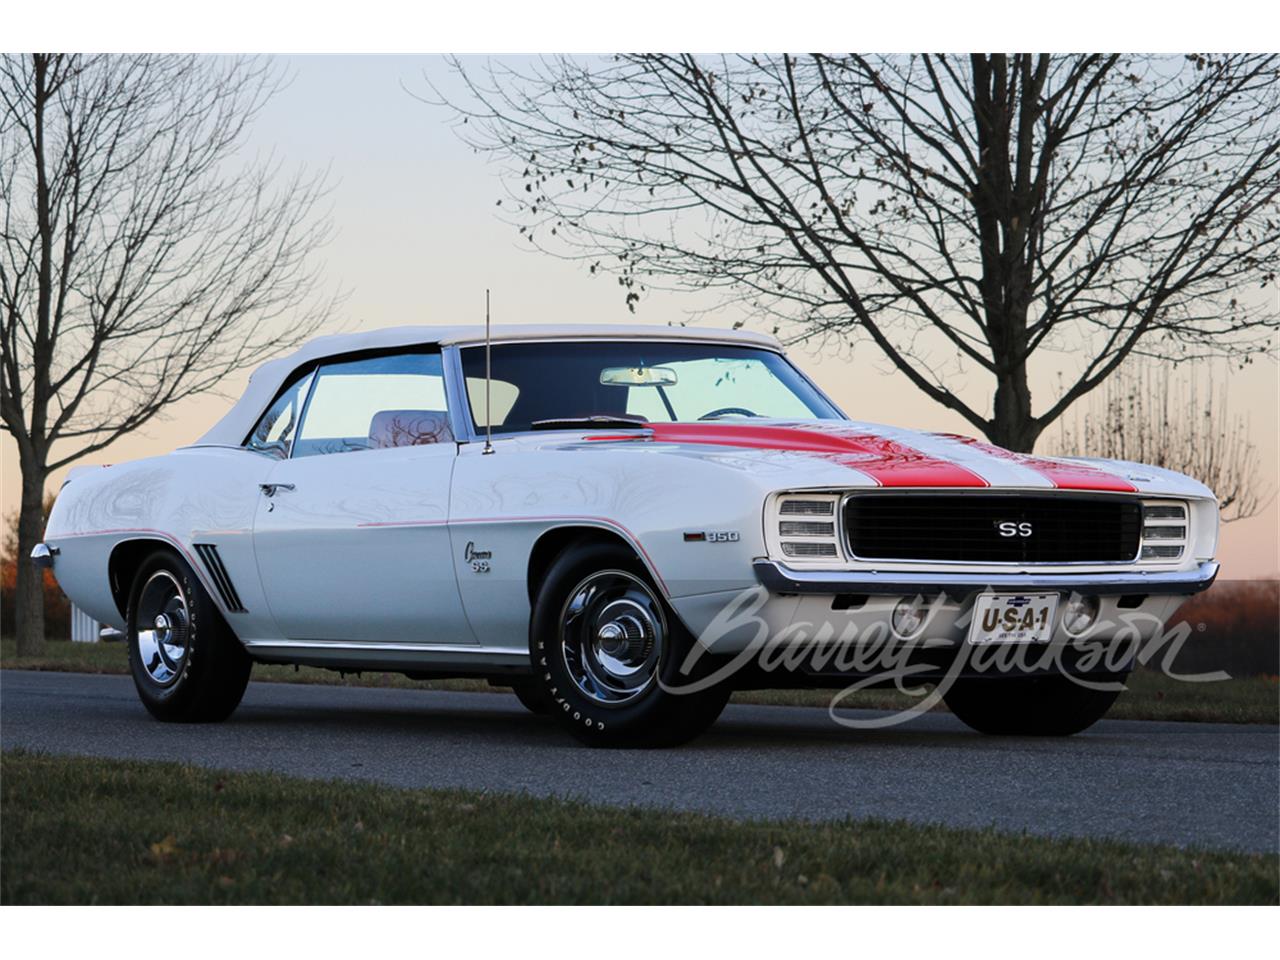 For Sale at Auction: 1969 Chevrolet Camaro in Scottsdale, Arizona for sale in Scottsdale, AZ